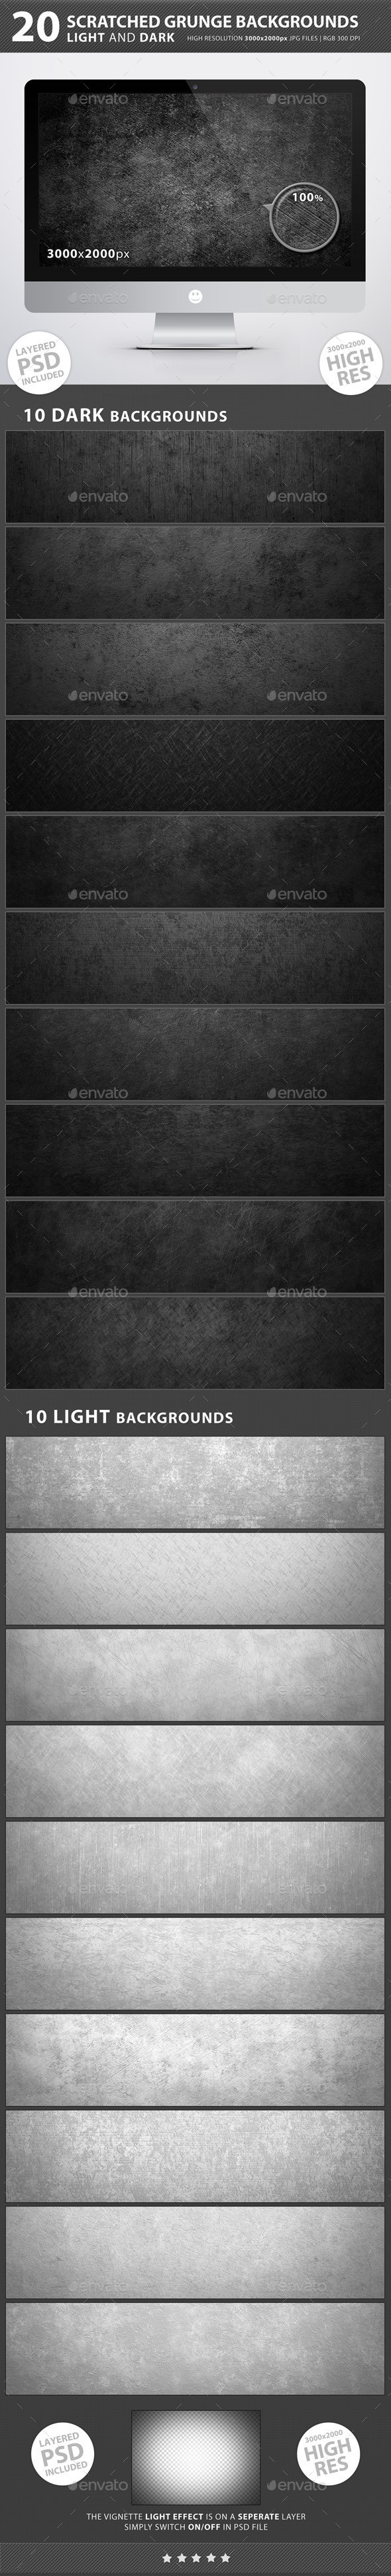 20 scratched grunge backgrounds preview